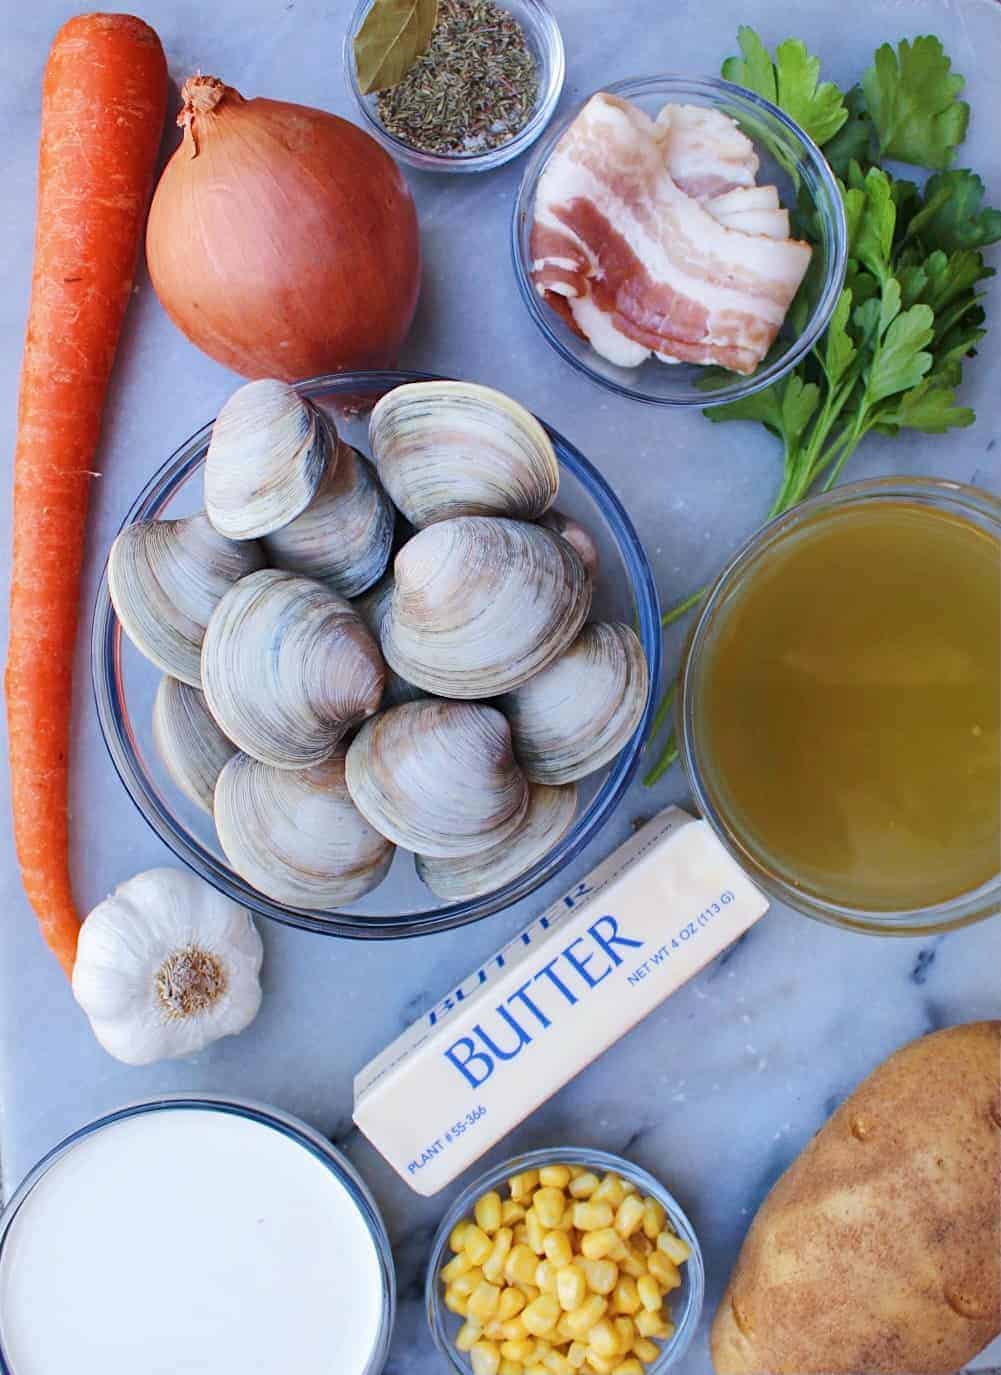 https://www.cuisineandcocktails.com/wp-content/uploads/2021/04/homemade-clam-chowder-ingredients.jpg